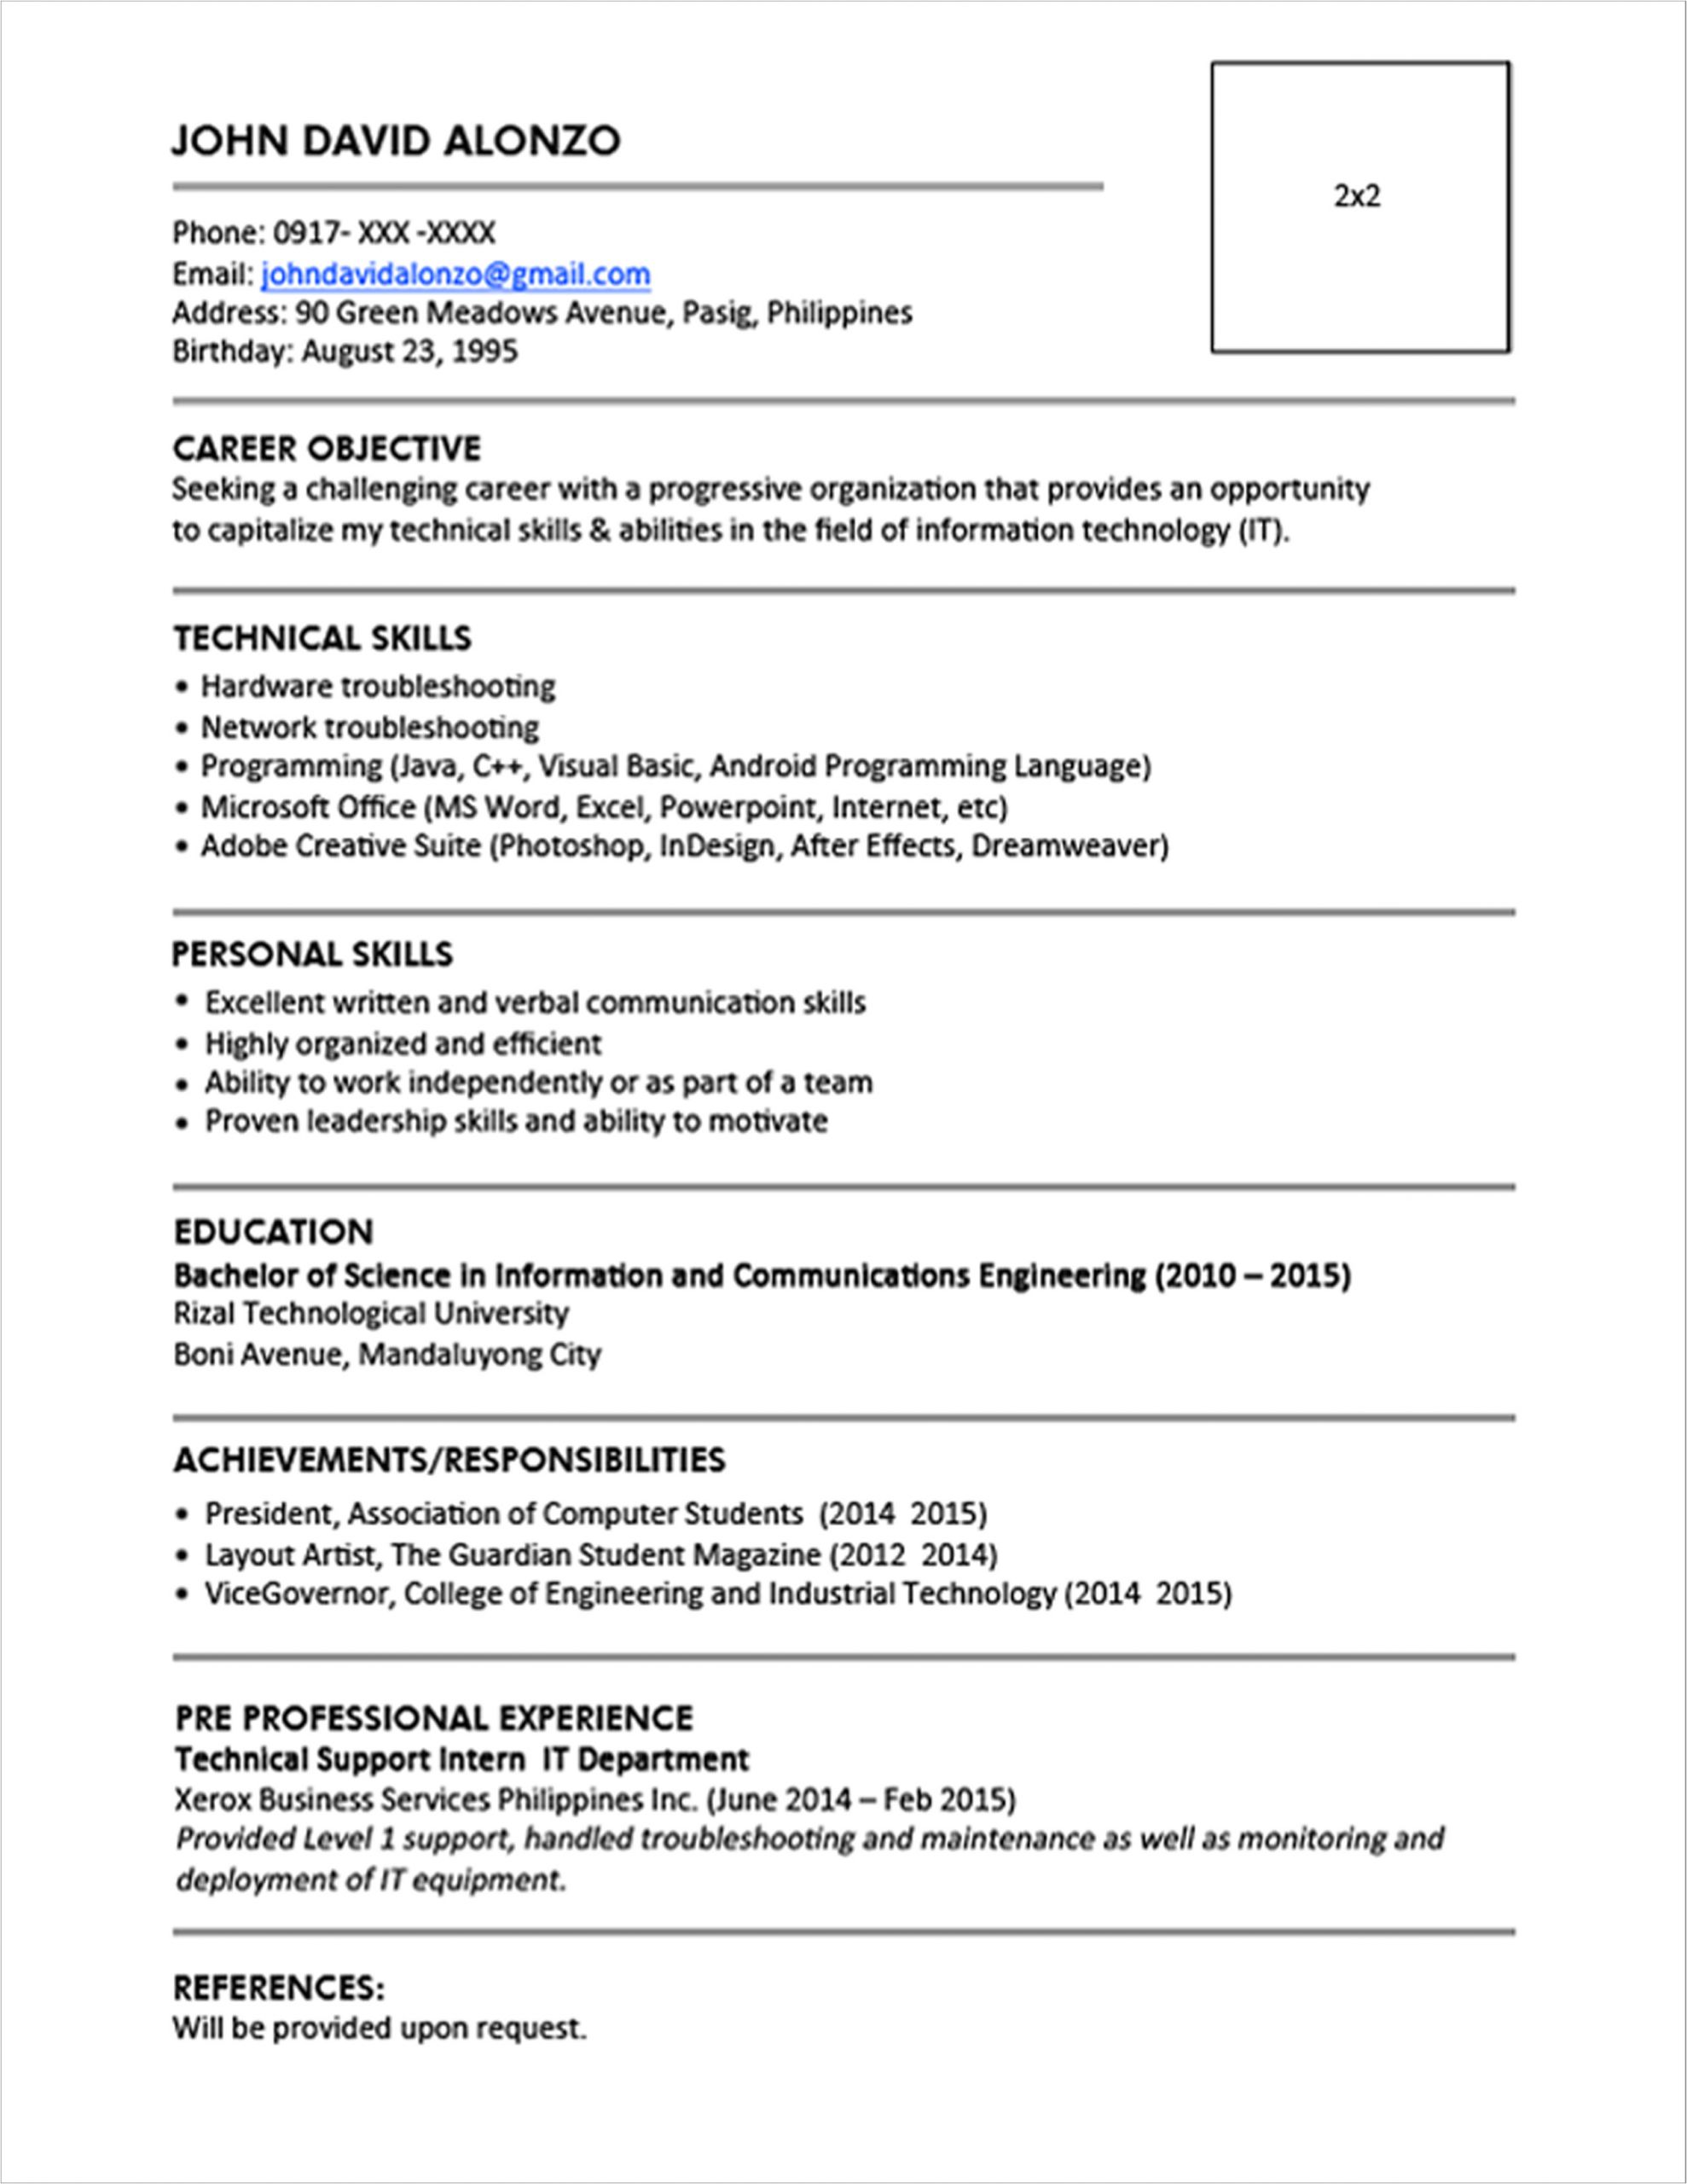 simple resume format in the philippines